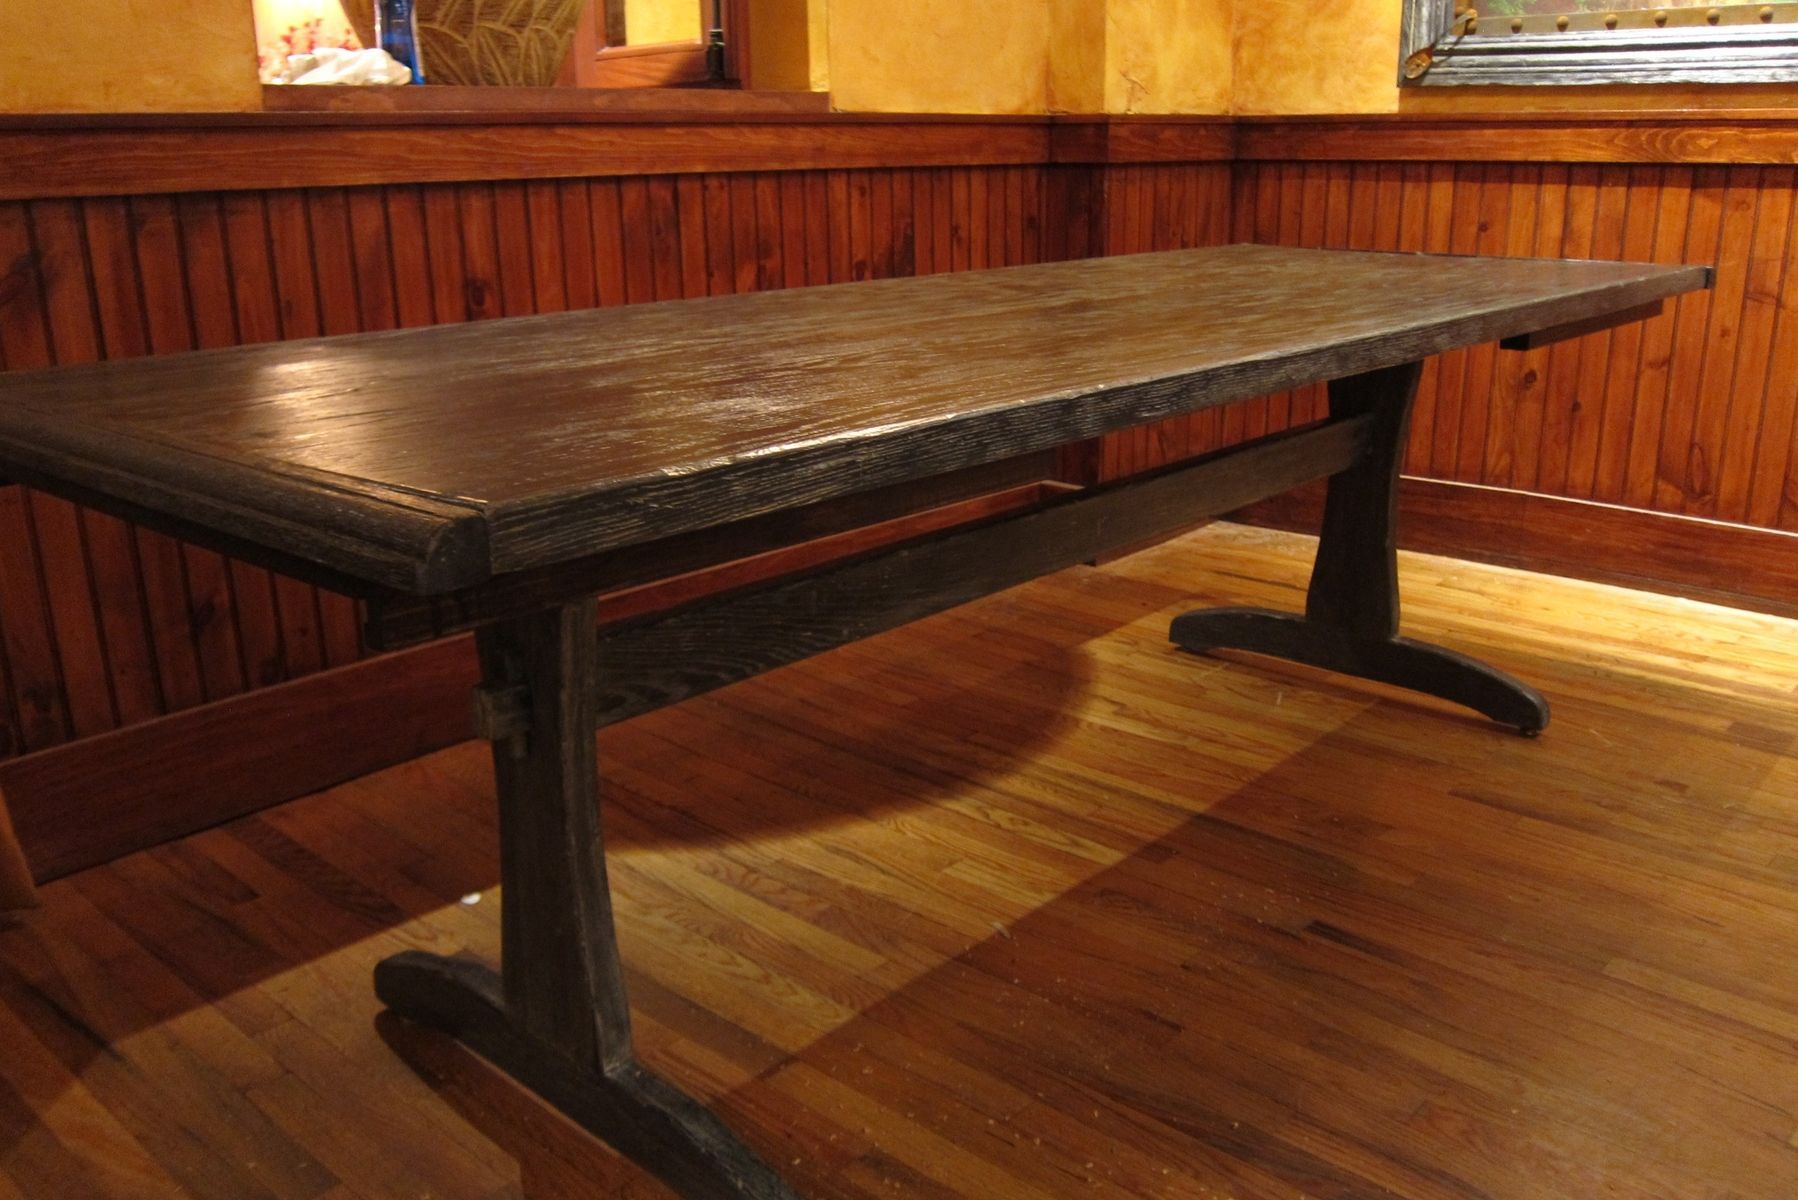 Handmade Rustic Dining Tablerecollection Design In Most Recently Released Rustic Honey Dining Tables (View 14 of 15)